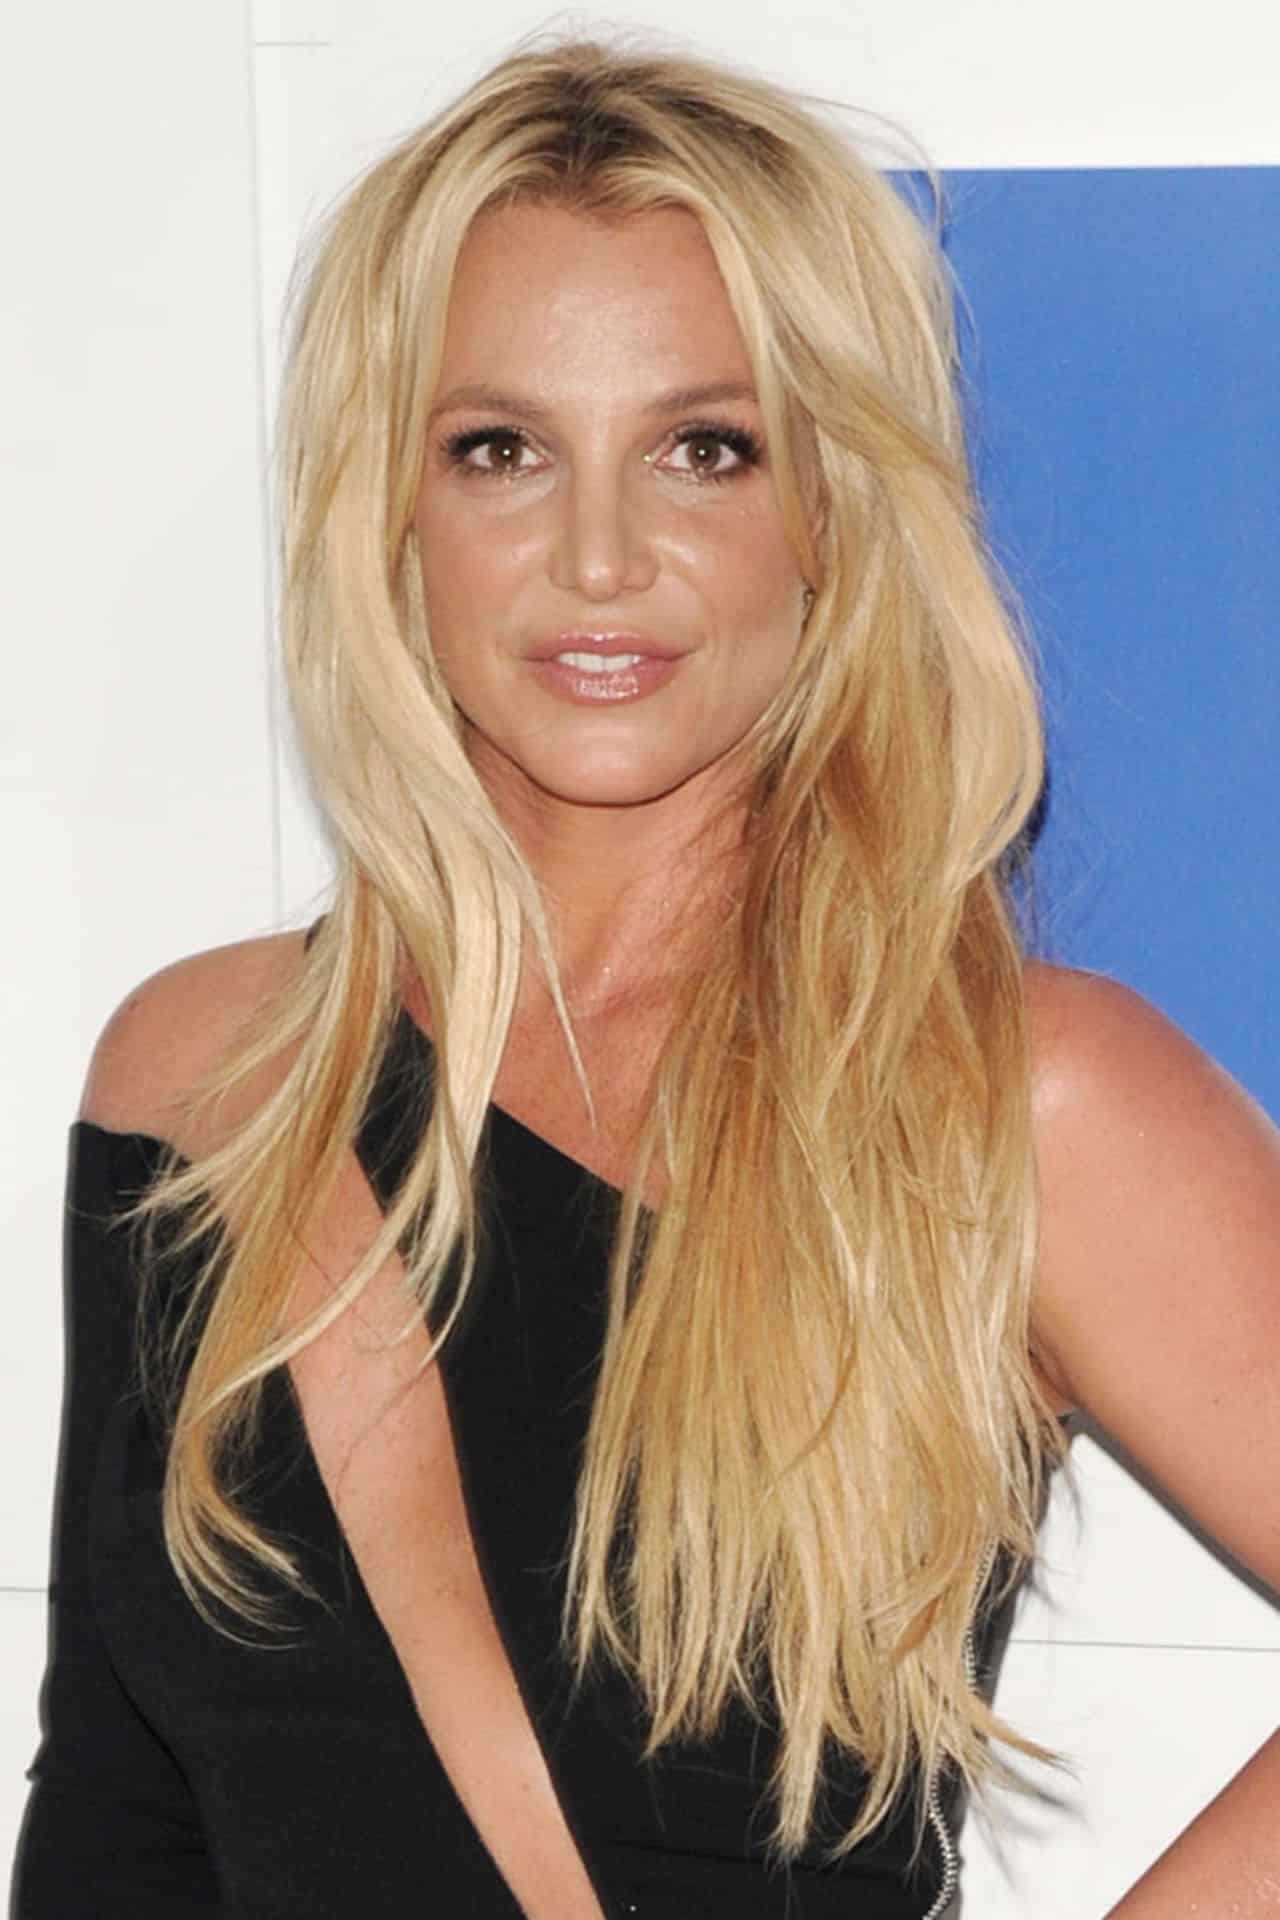 Britney Spears Channels Old Hollywood in Chic LBD at MTV VMAs